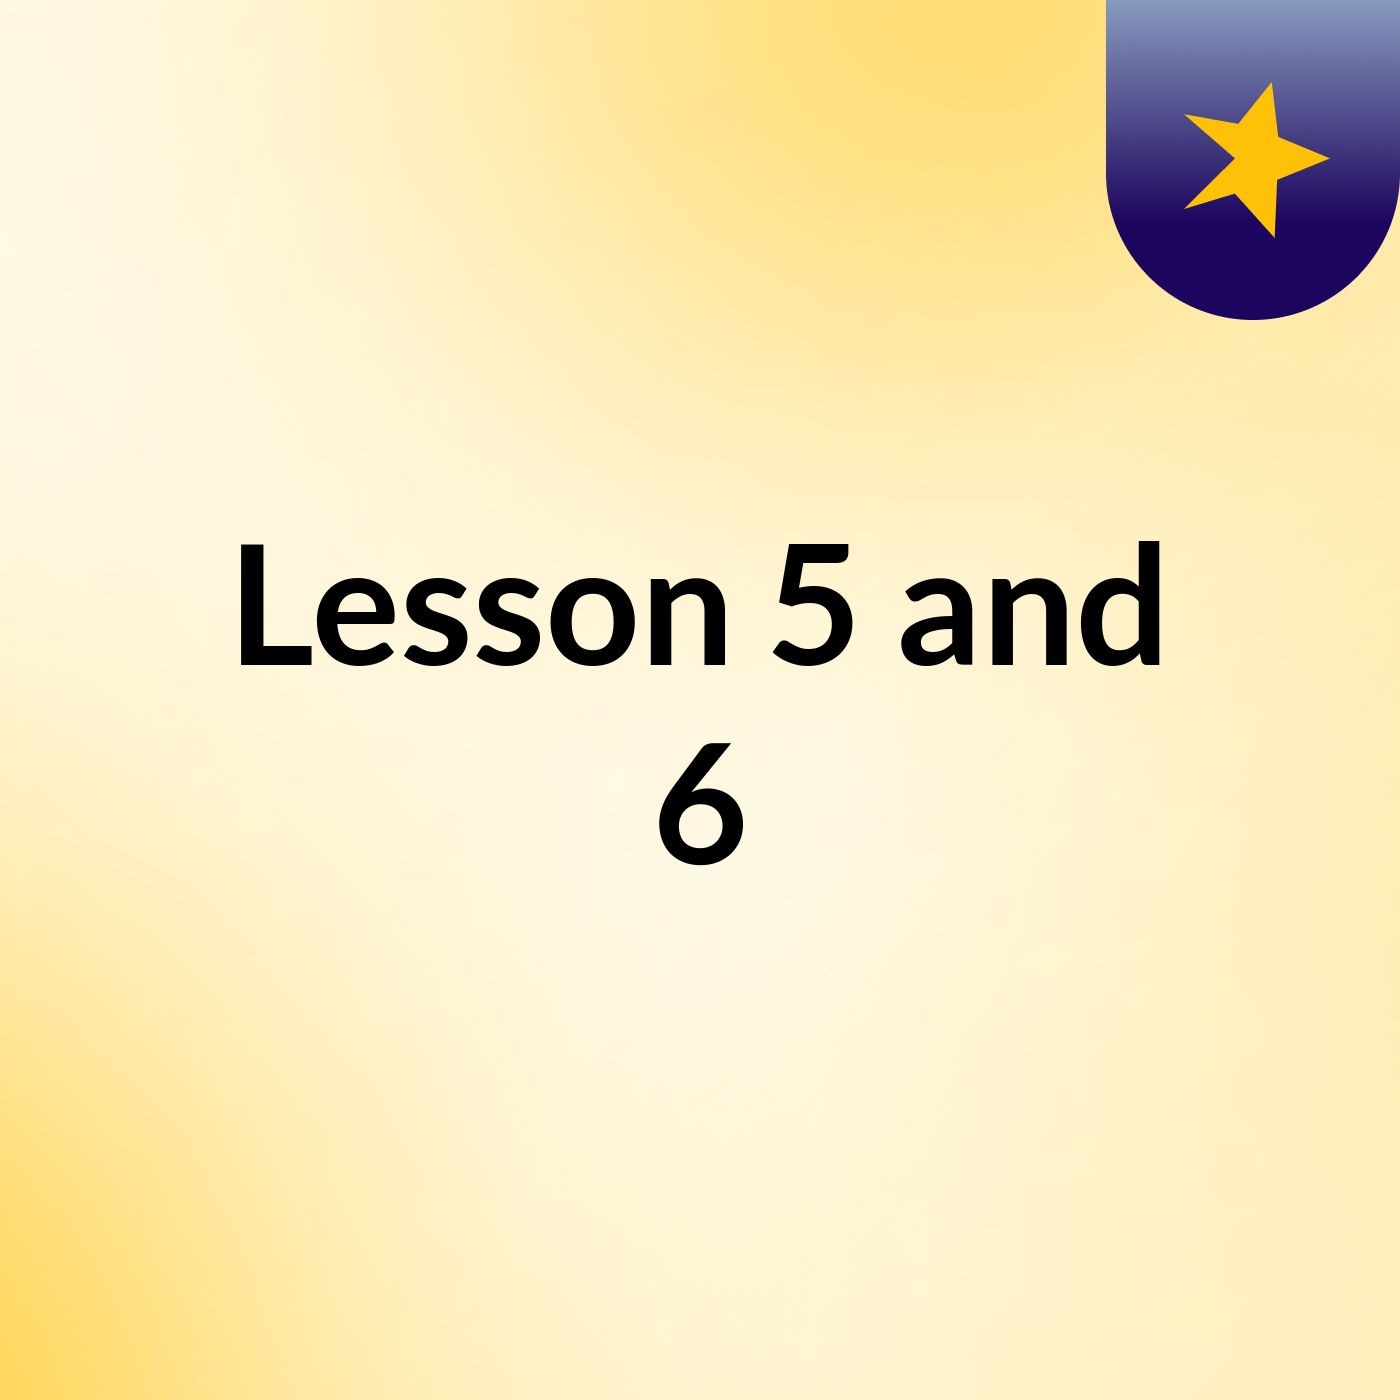 Lesson 5 and 6